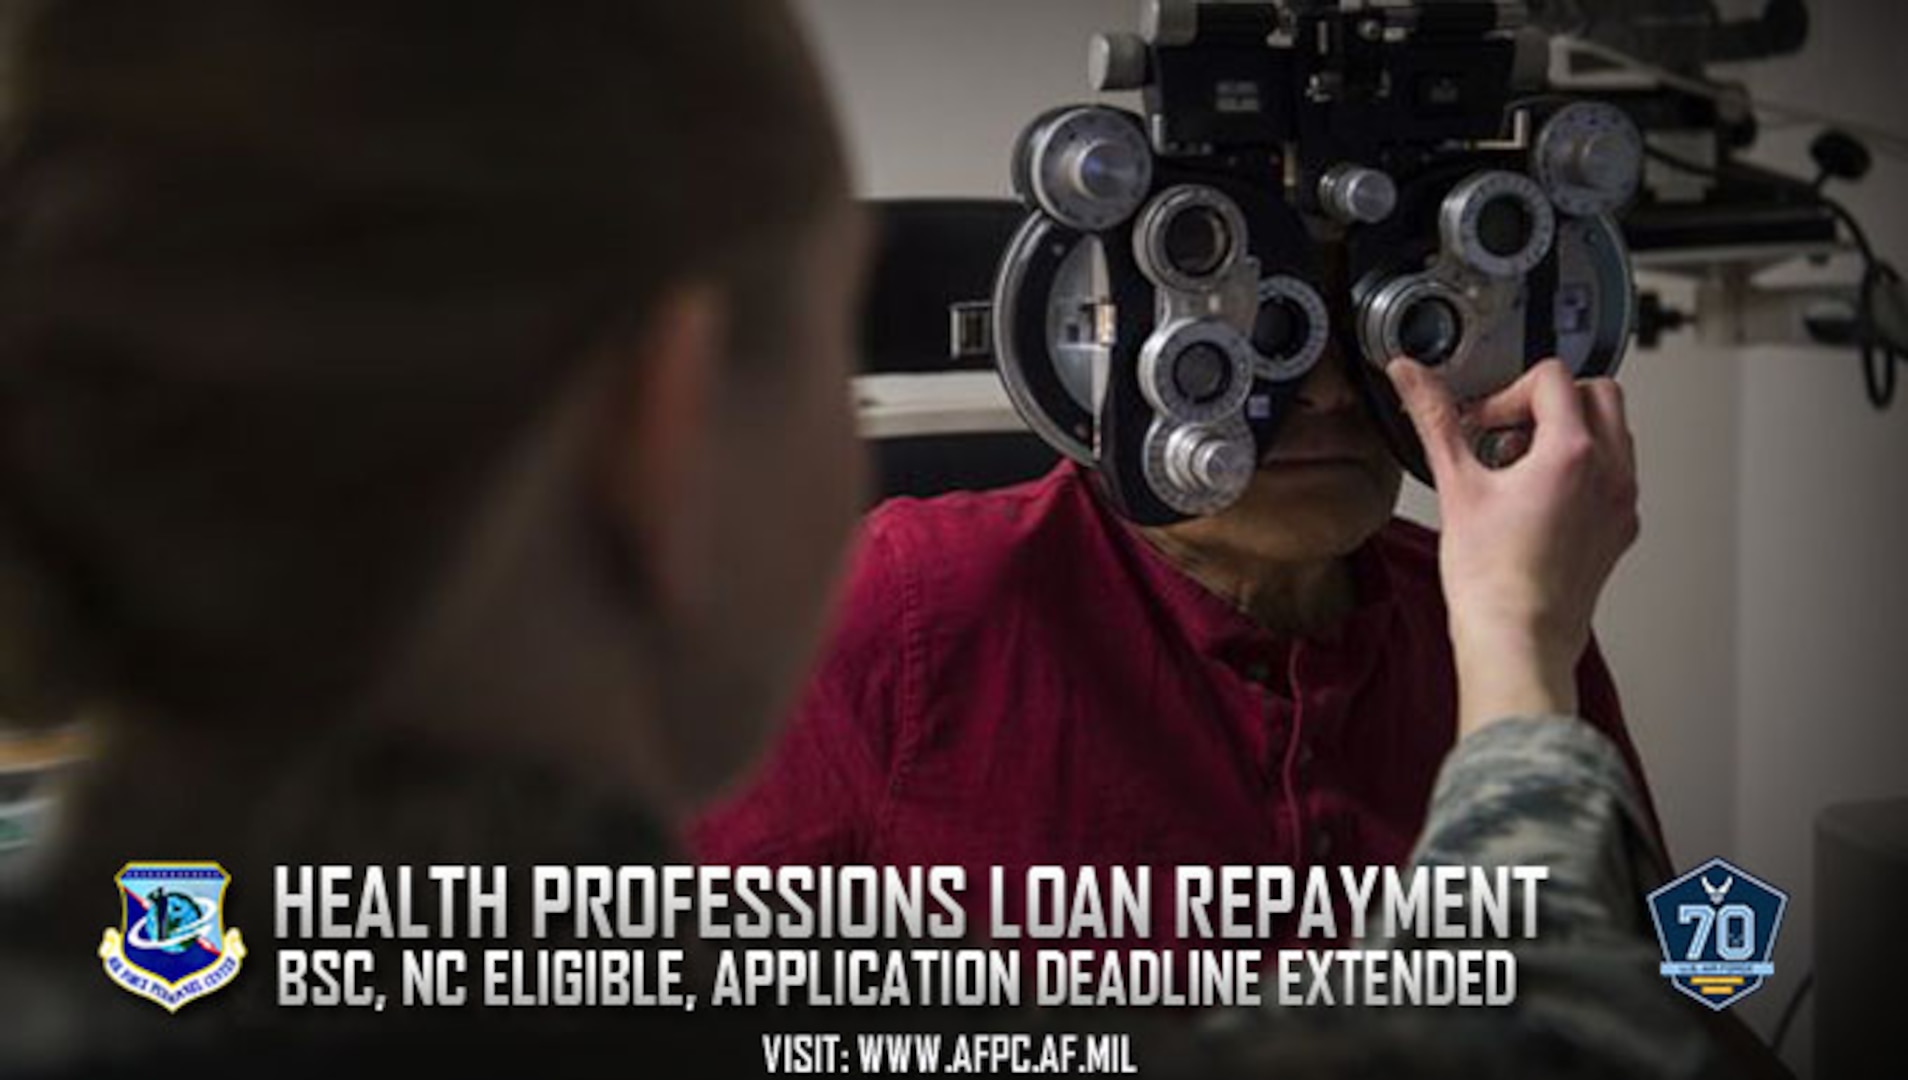 The Air Force has extended the deadline to Sept. 1 to apply for the active-duty Health Professions Loan Repayment Program in fiscal year 2017. Applicants must hold a specialty in either the Biomedical Sciences or Nurse Corps. (U.S. Air Force photo by Staff Sgt. Christopher Ruano)